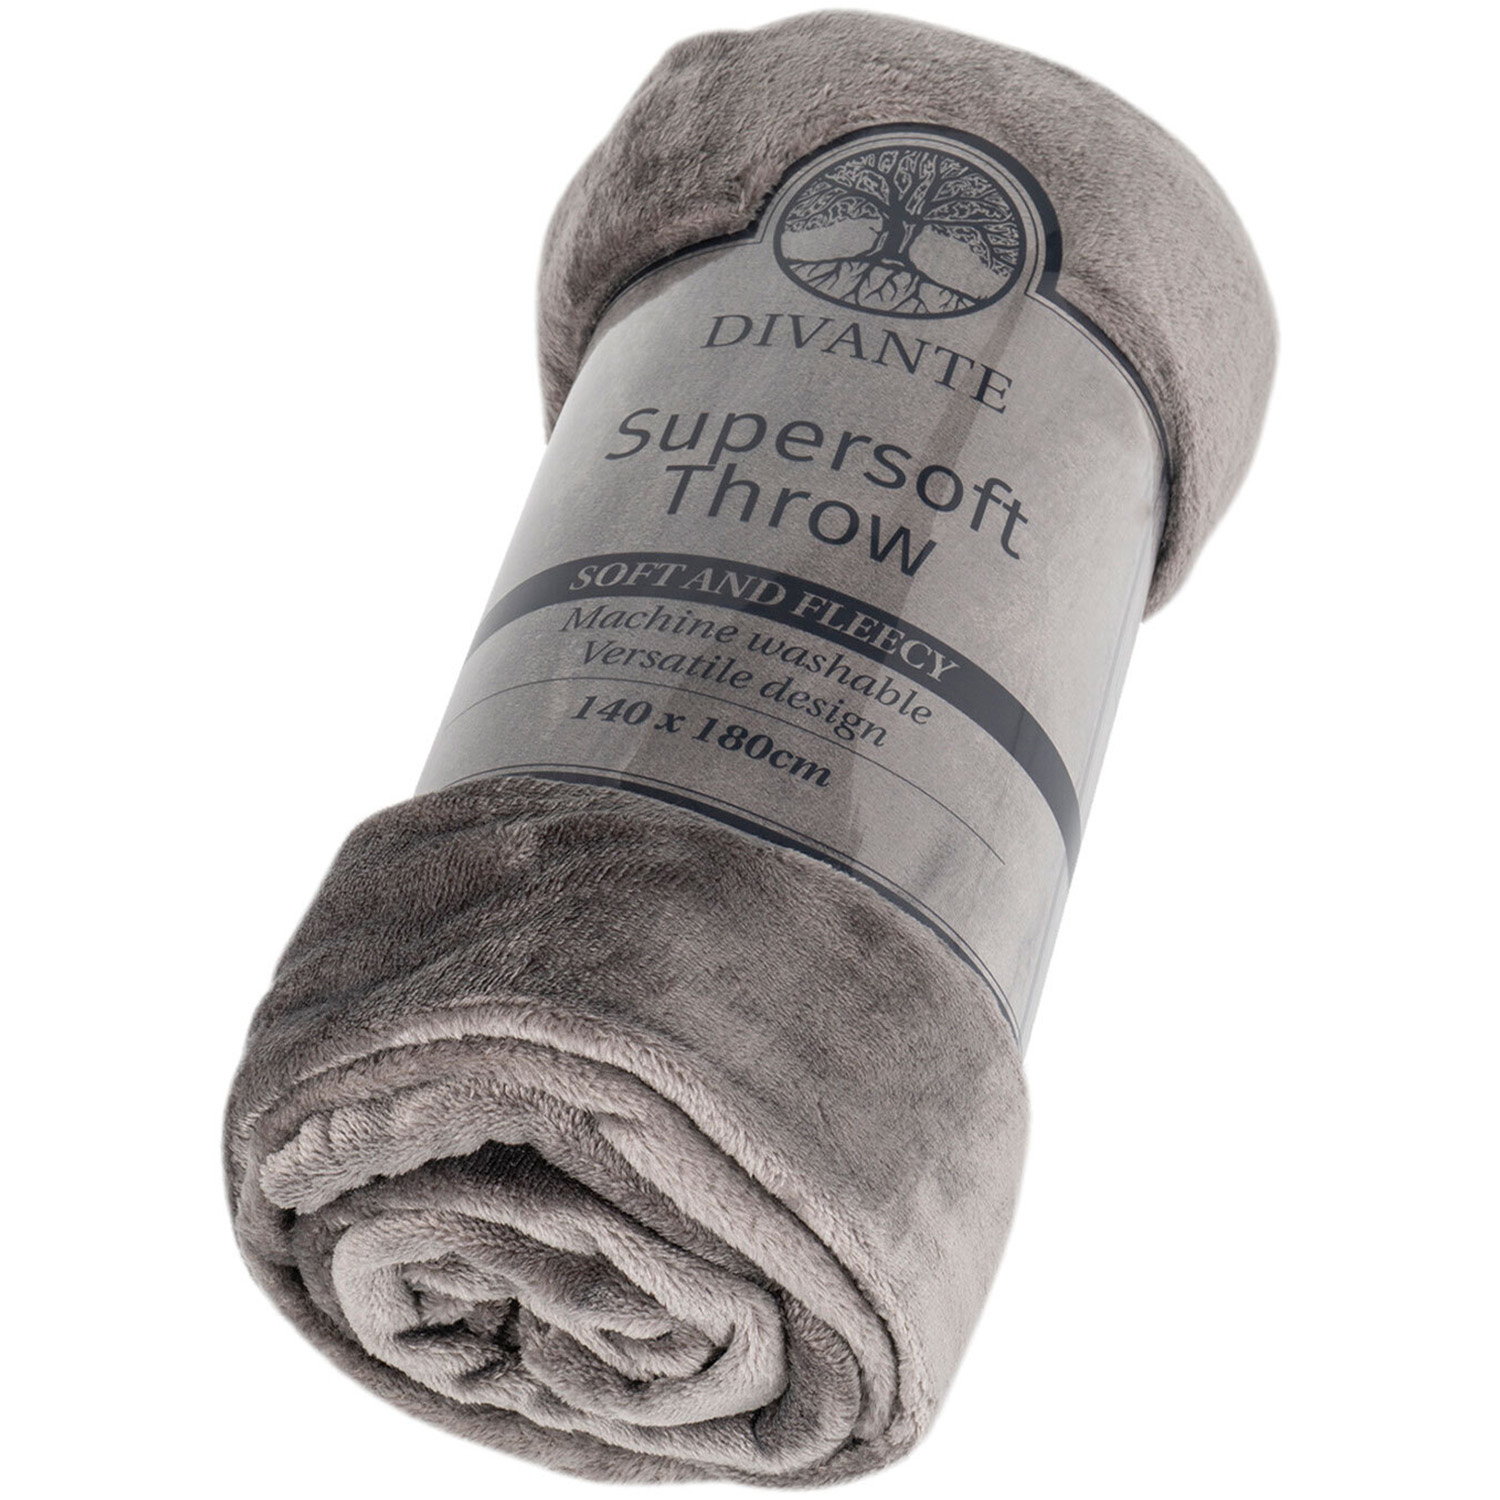 Divante Charcoal Supersoft Large Throw Image 1